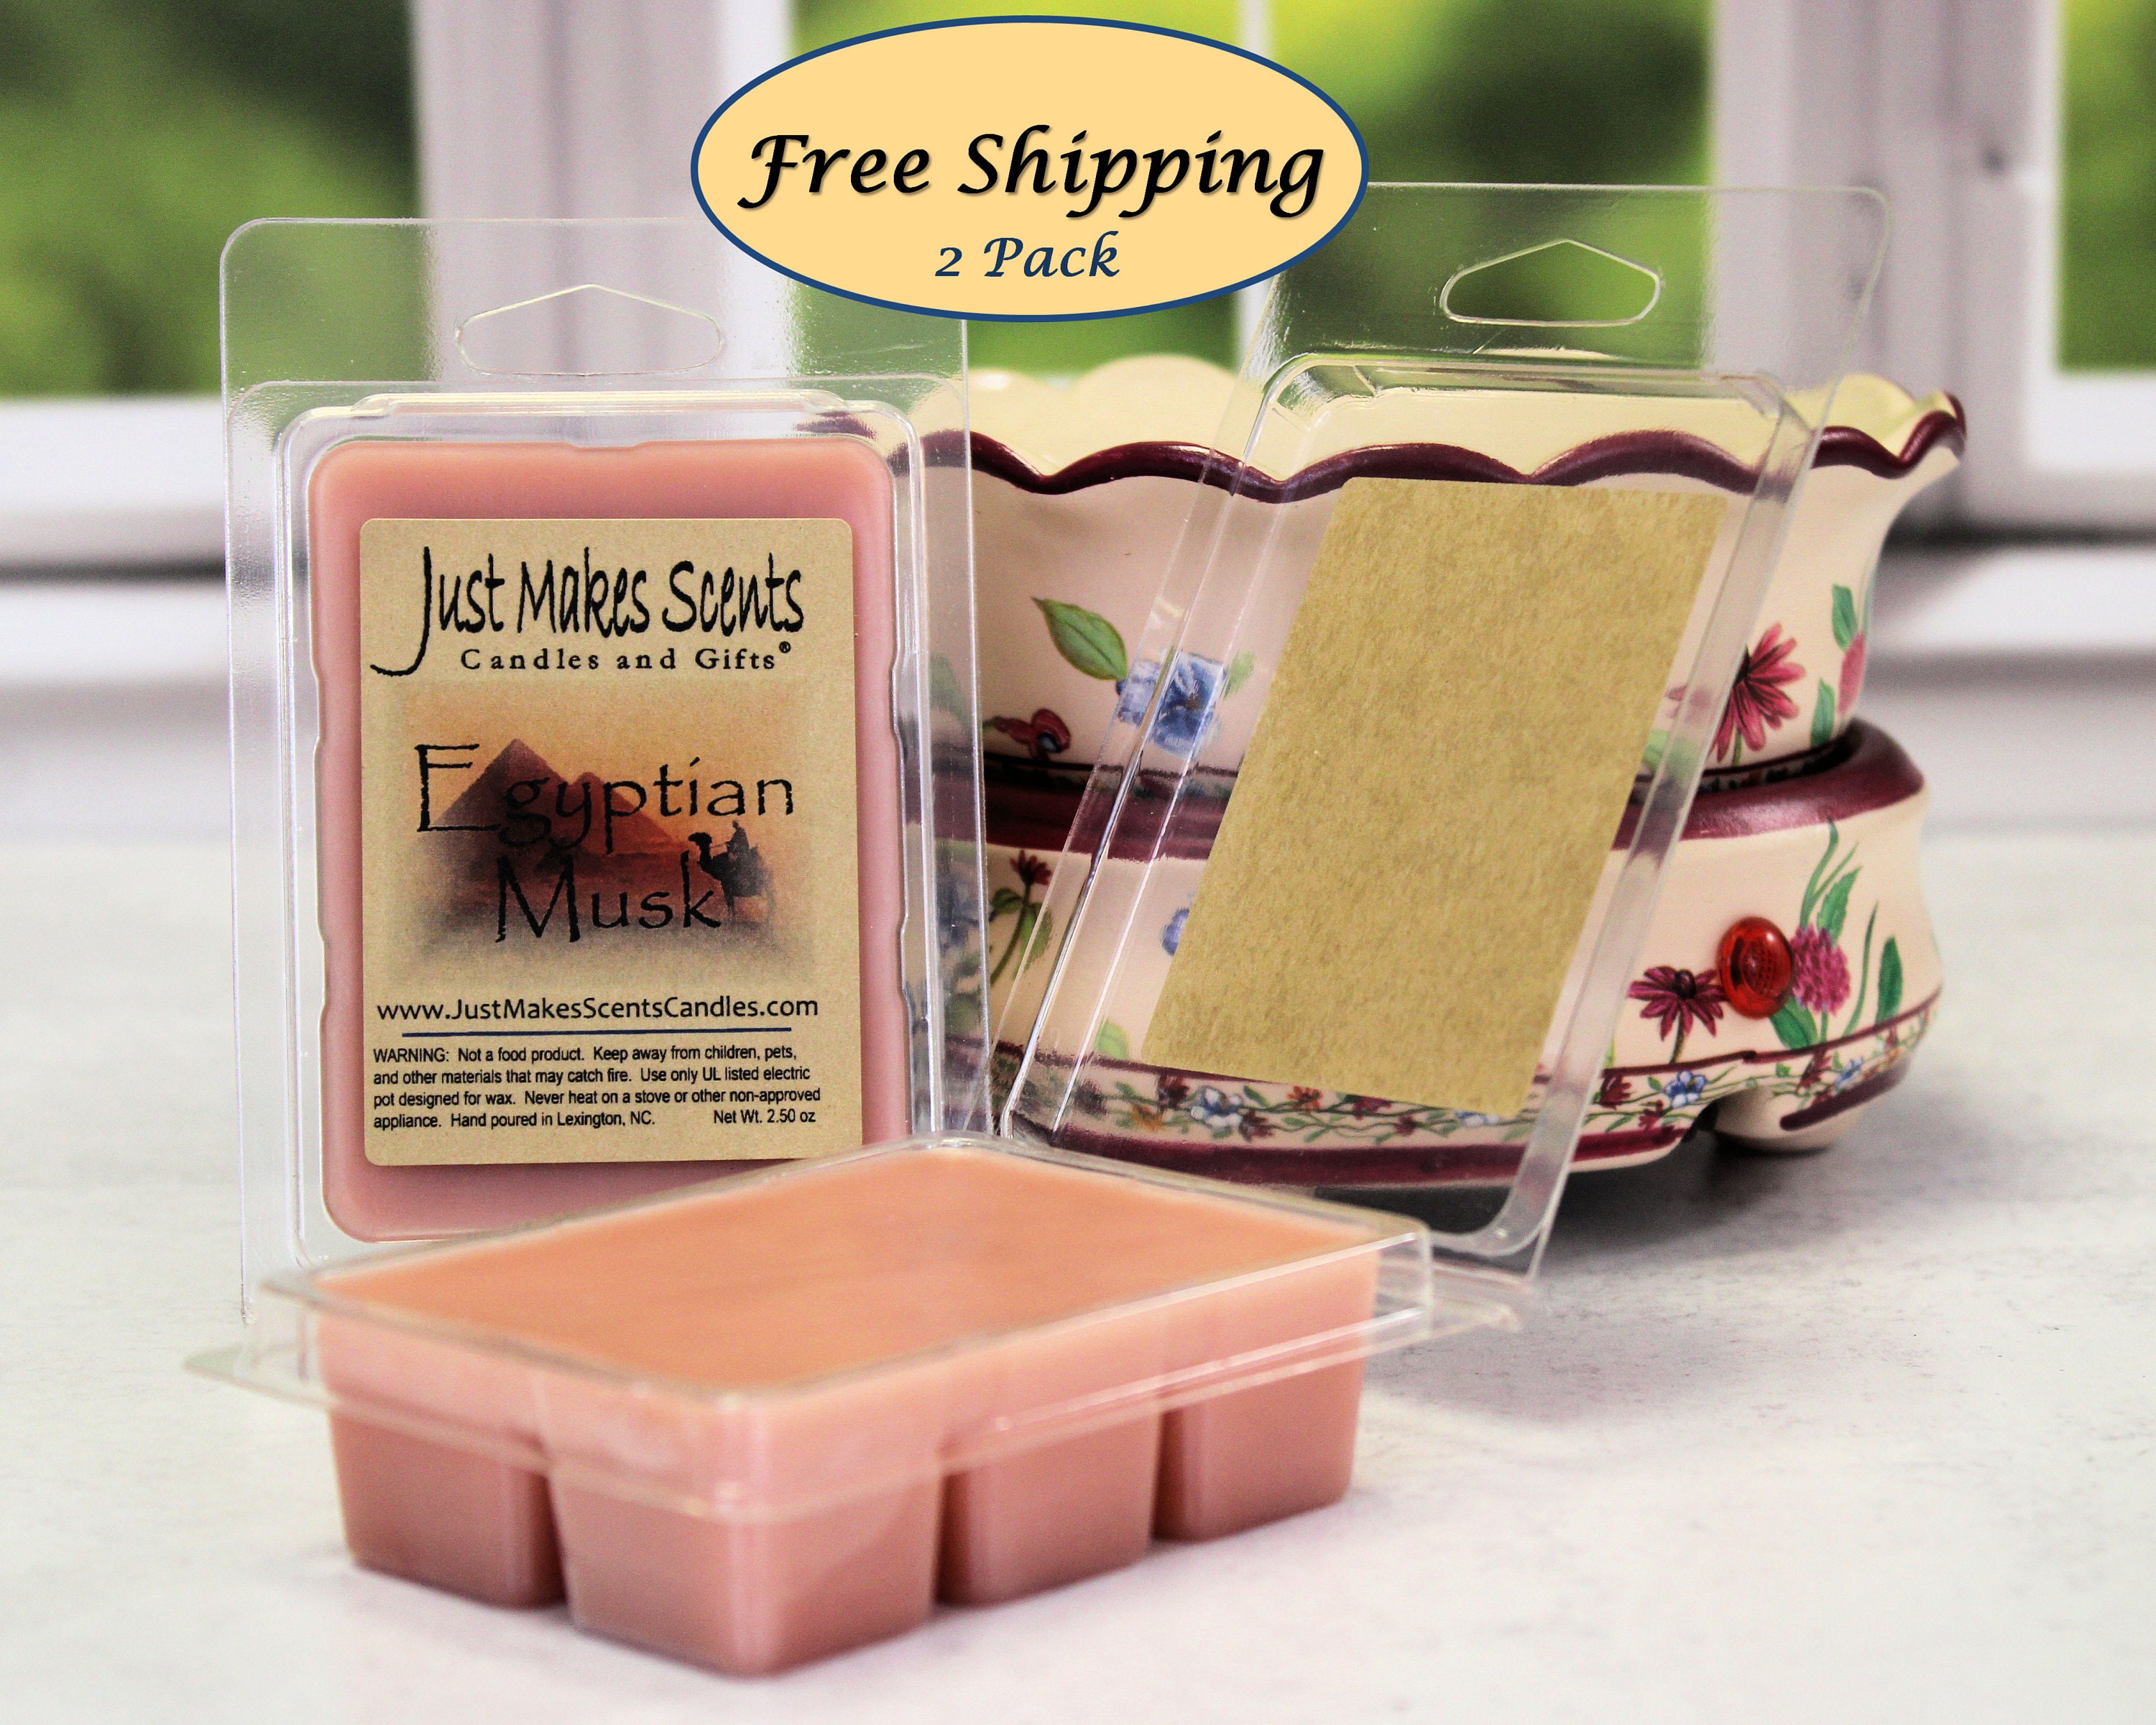 Wax Melts 2.5 Oz Agave Pear & Dark Musk Scent Wax Cubes Hemp Soy Wax Melts  Scented Wax Cubes Strong Scented Handmade 